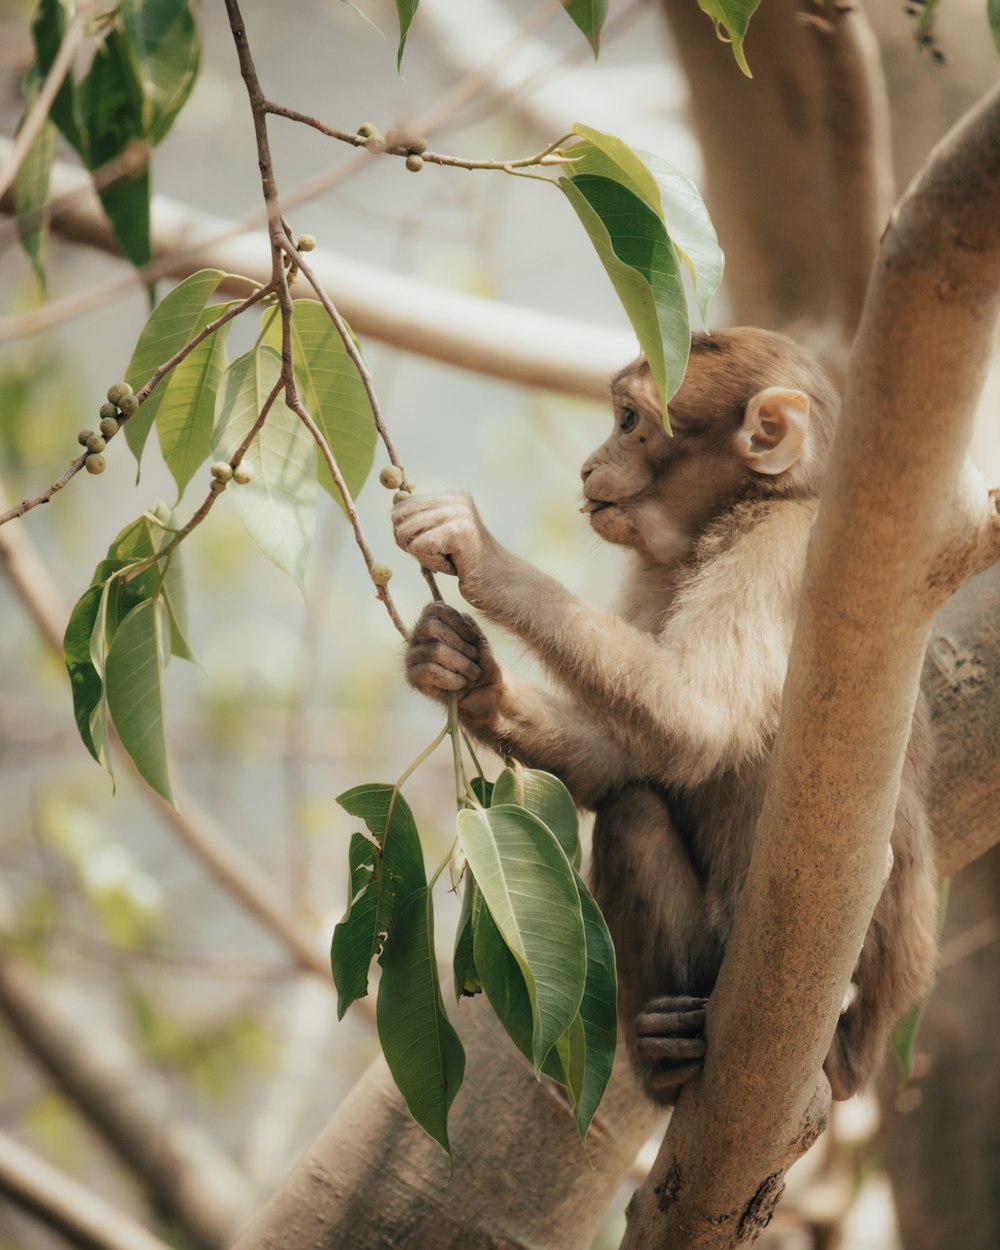 a monkey sitting in a tree holding onto a branch